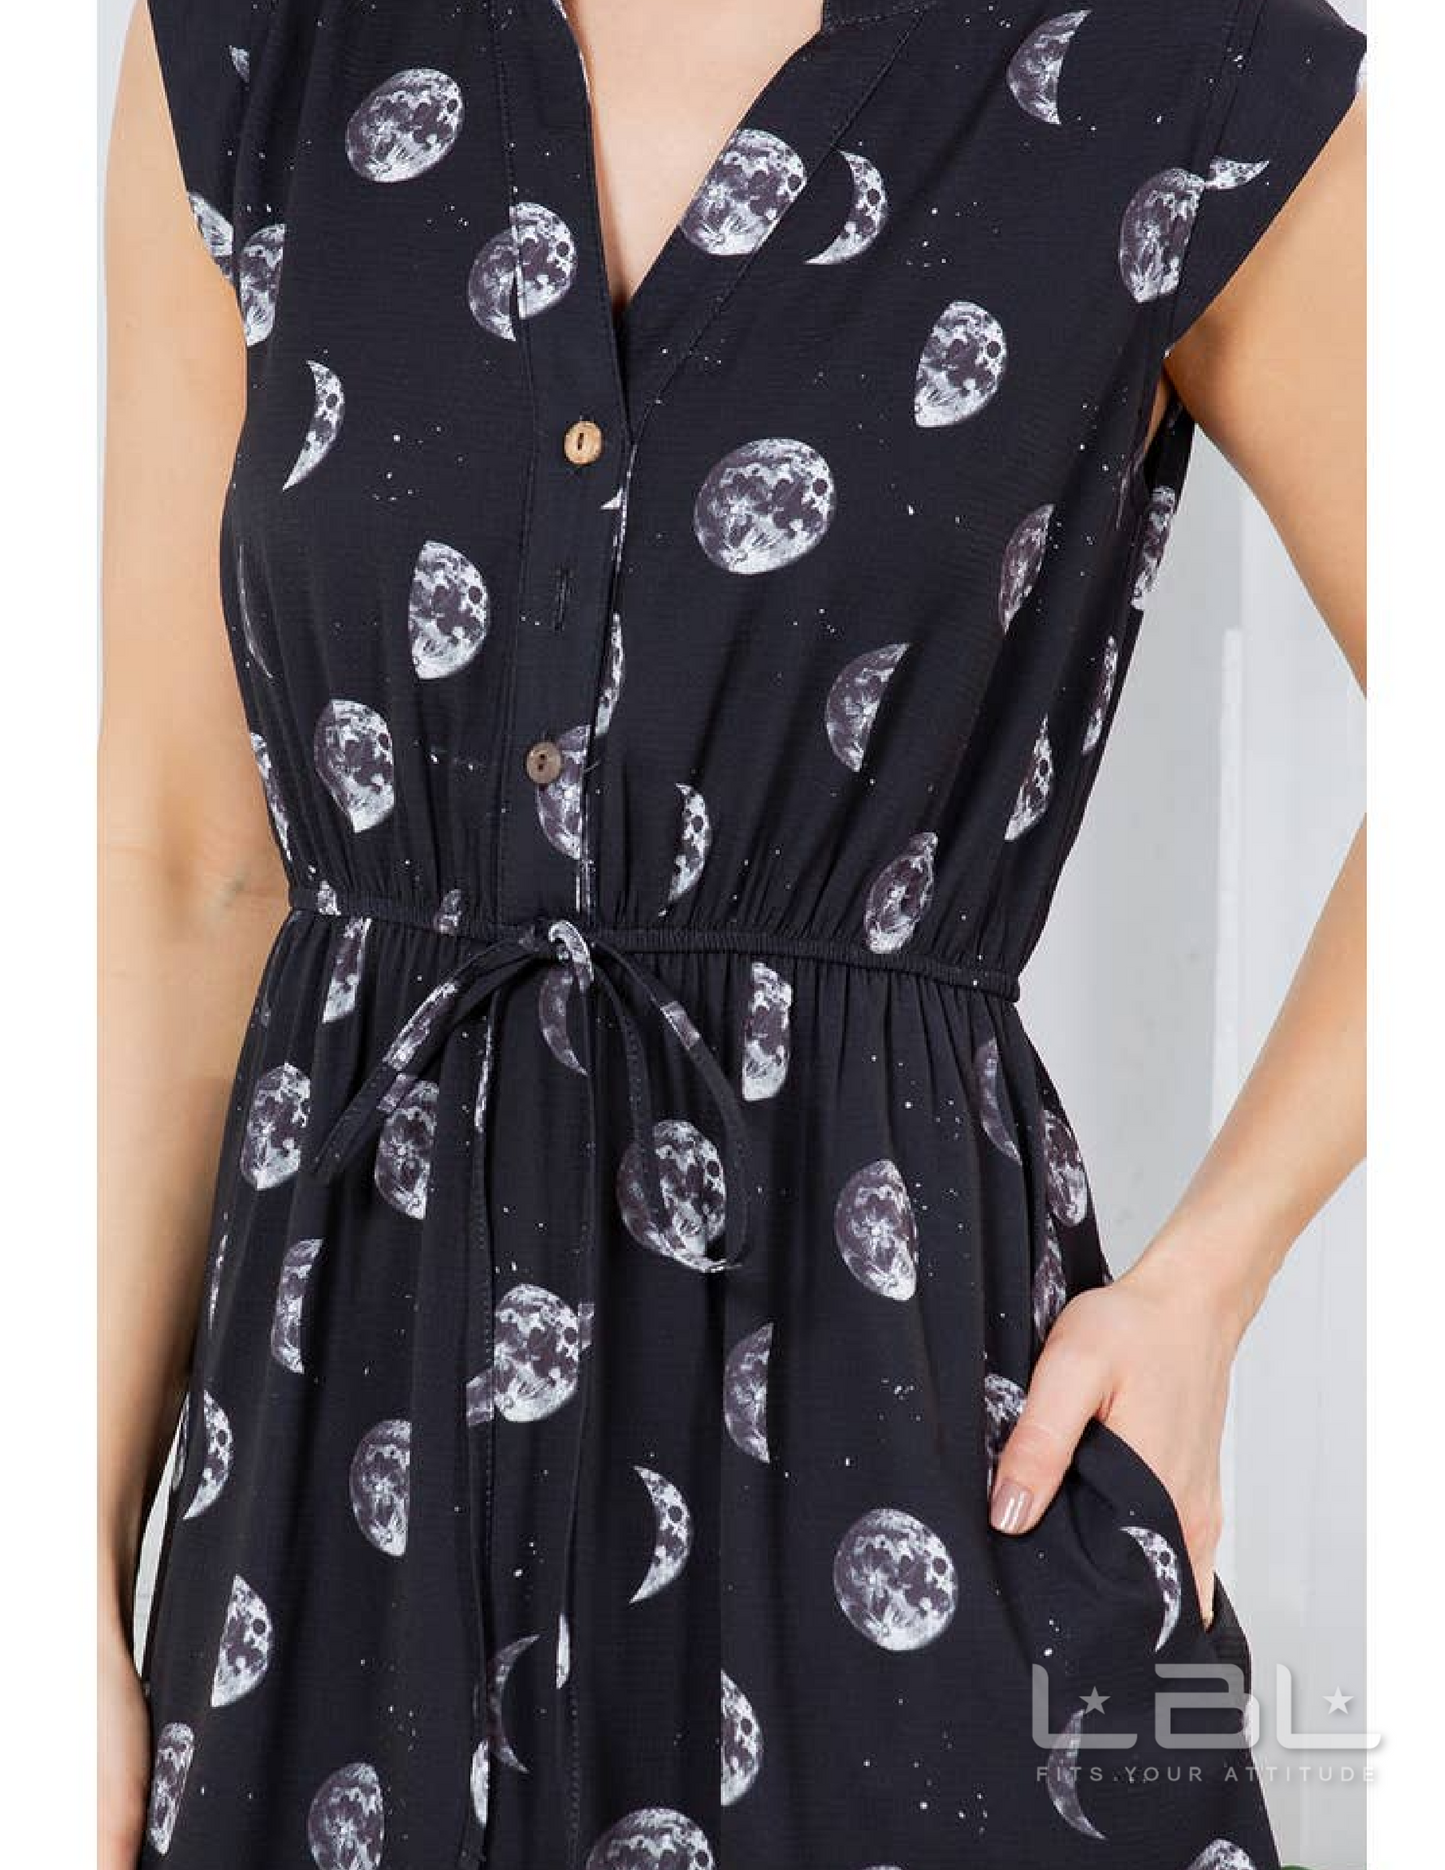 All over moon dress 